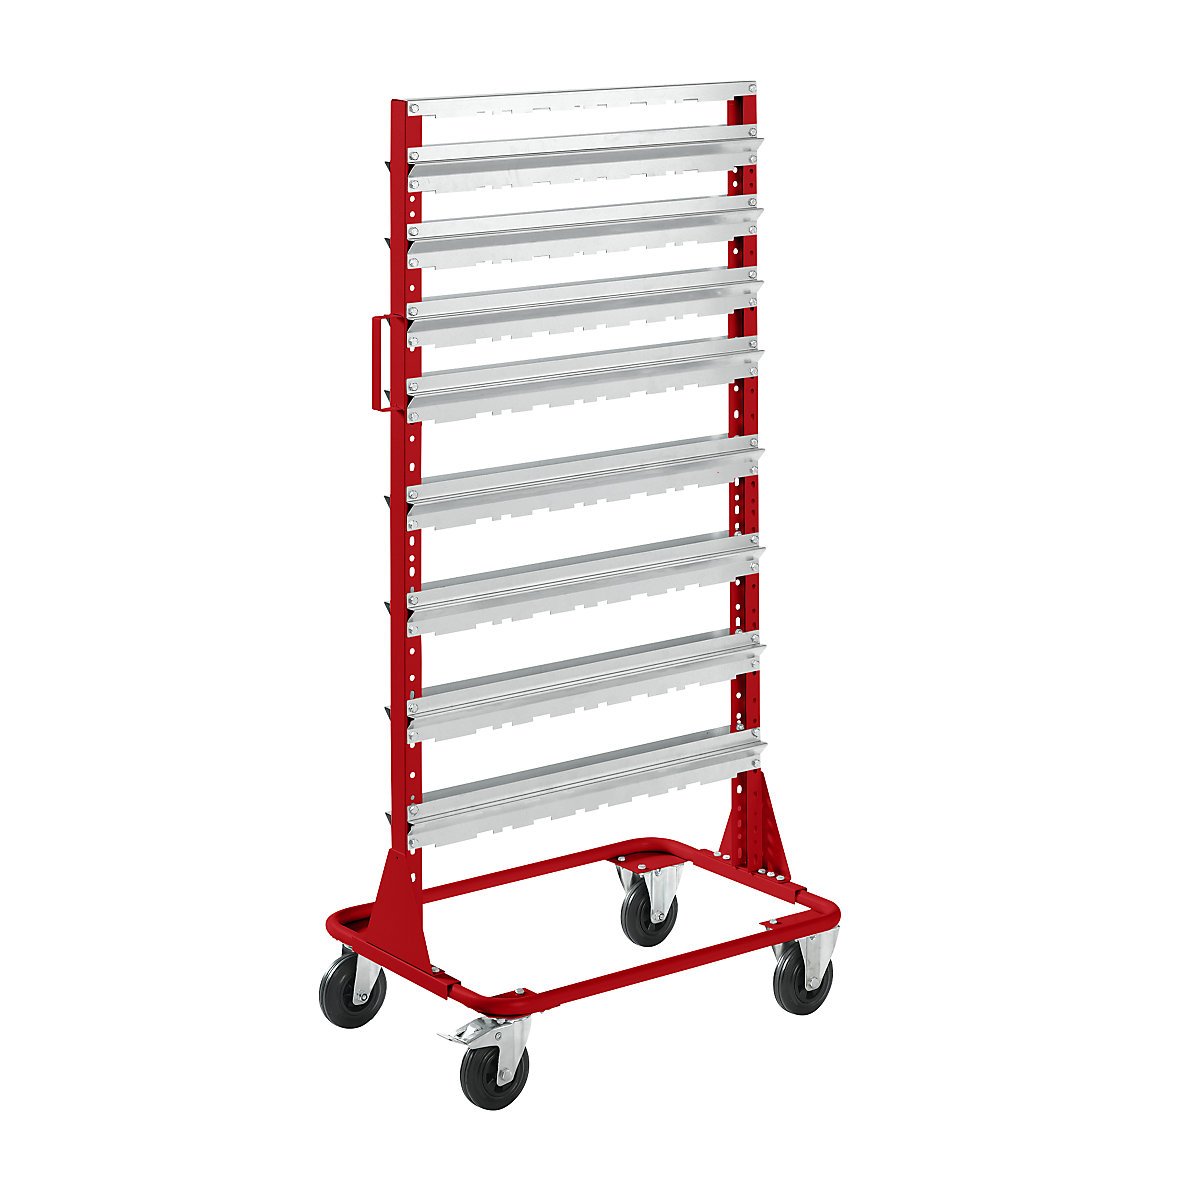 Mobile rack, height 1588 mm, mobile rack for 80 open fronted storage bins, flame red-4